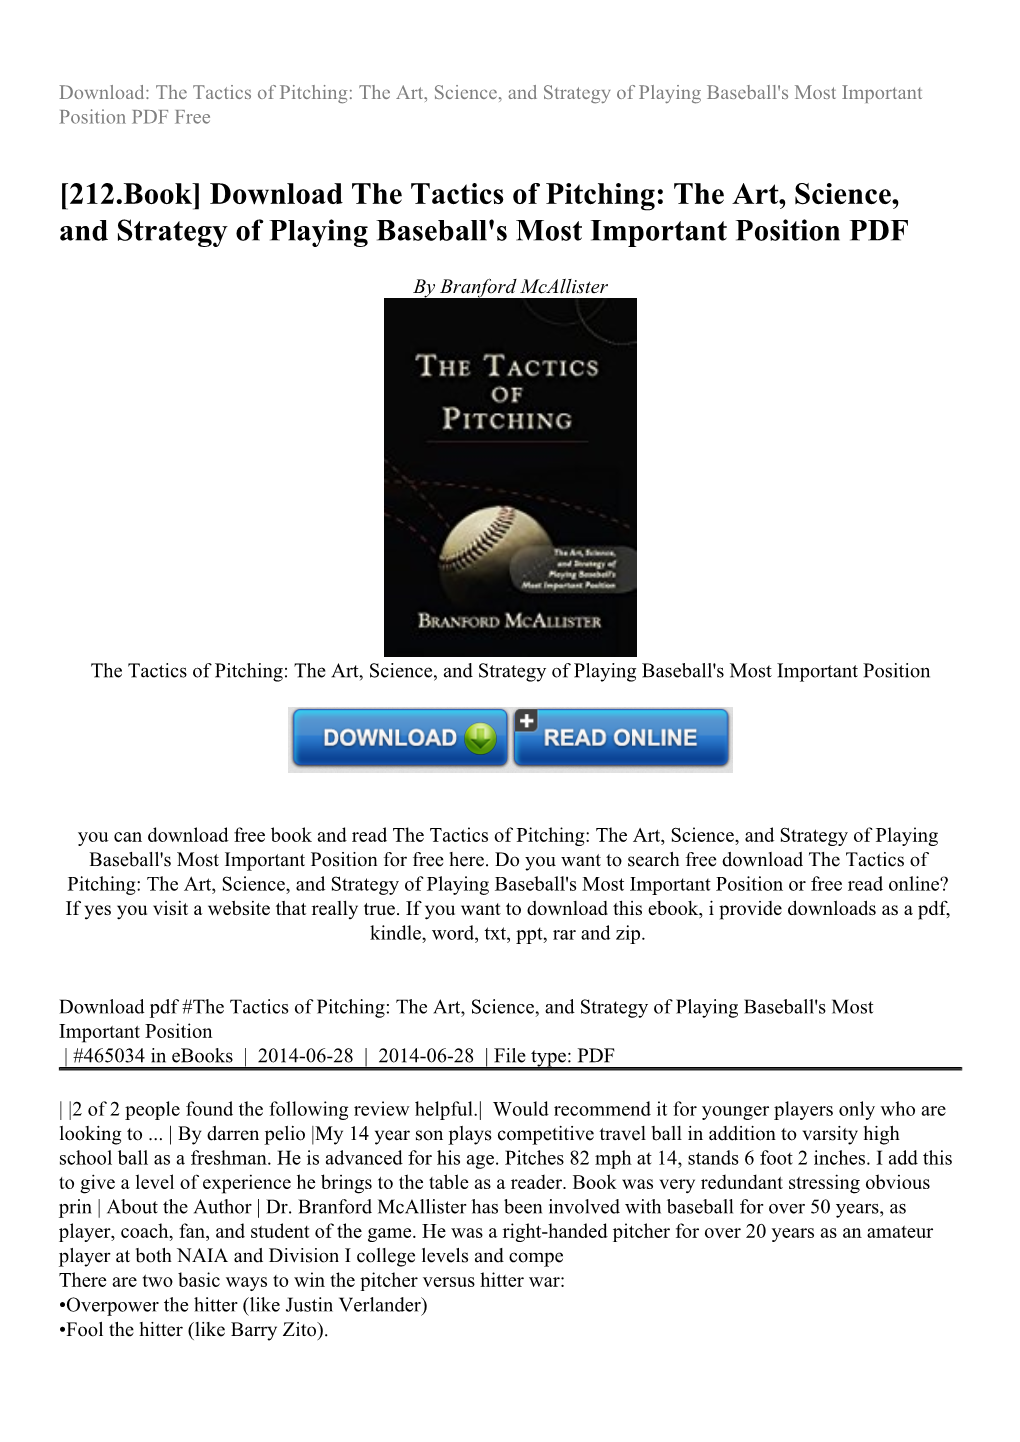 Download the Tactics of Pitching: the Art, Science, and Strategy of Playing Baseball's Most Important Position PDF